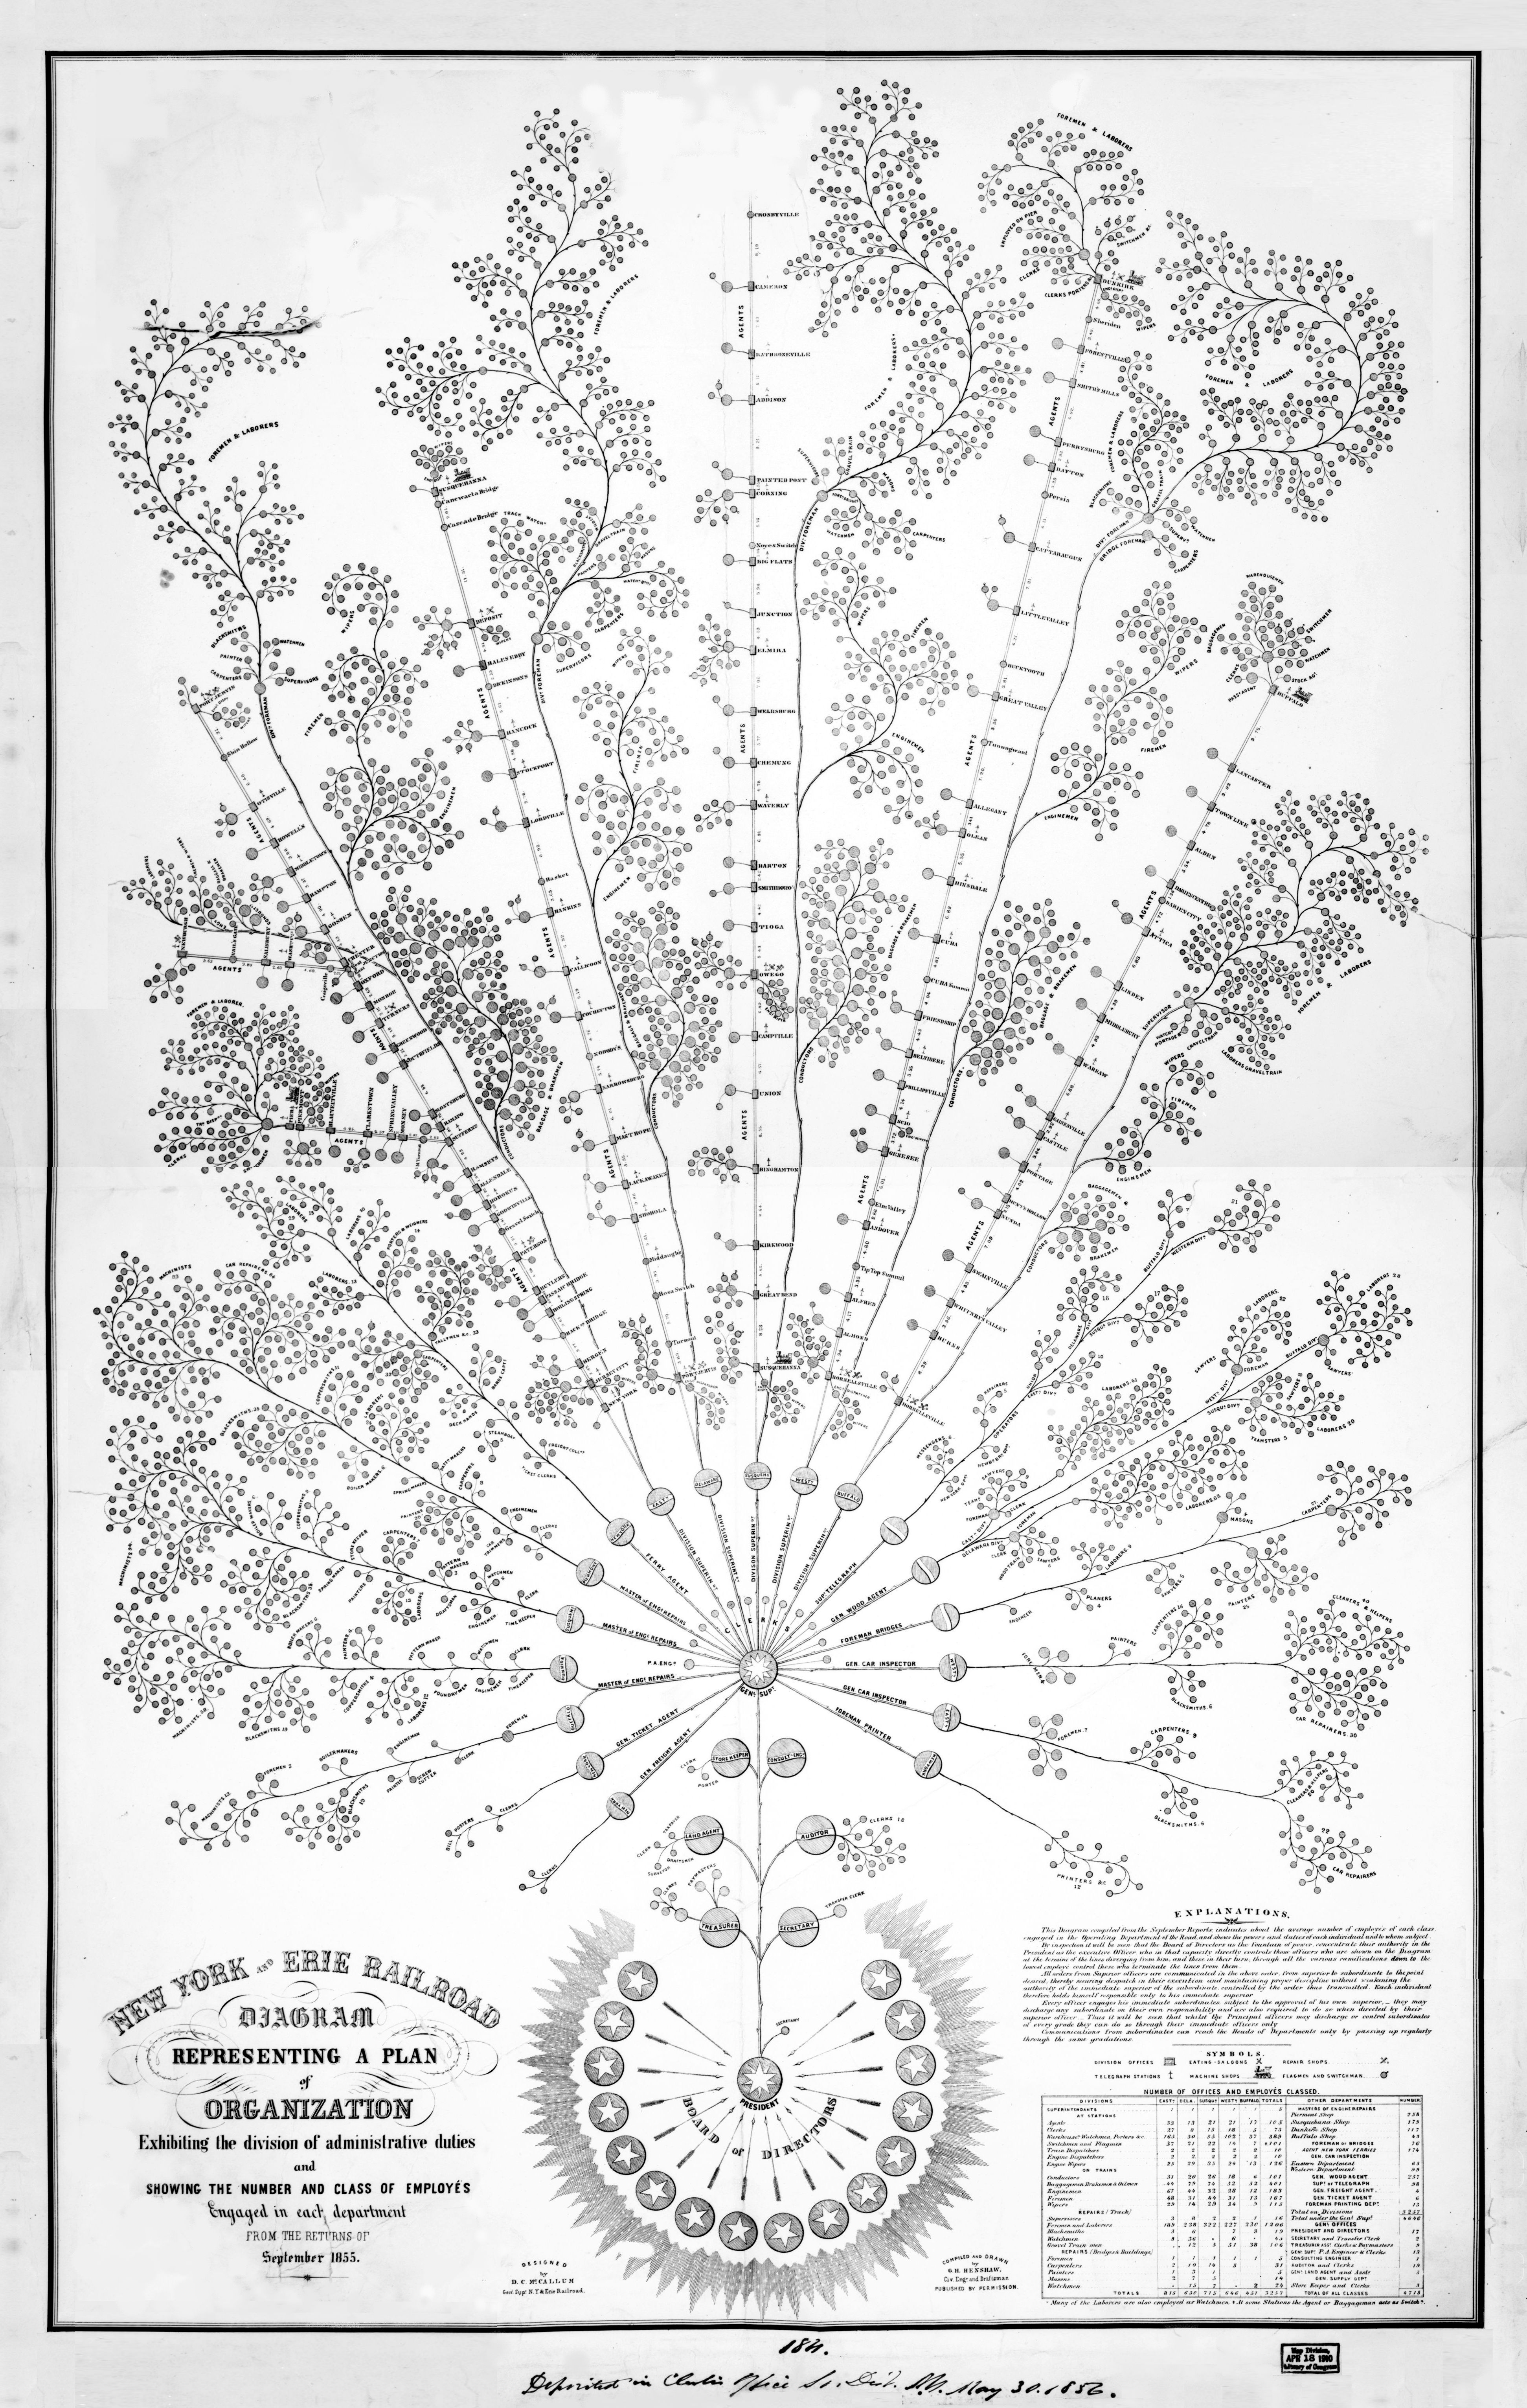 Organizational diagram of the New York and Erie Railroad, 1855